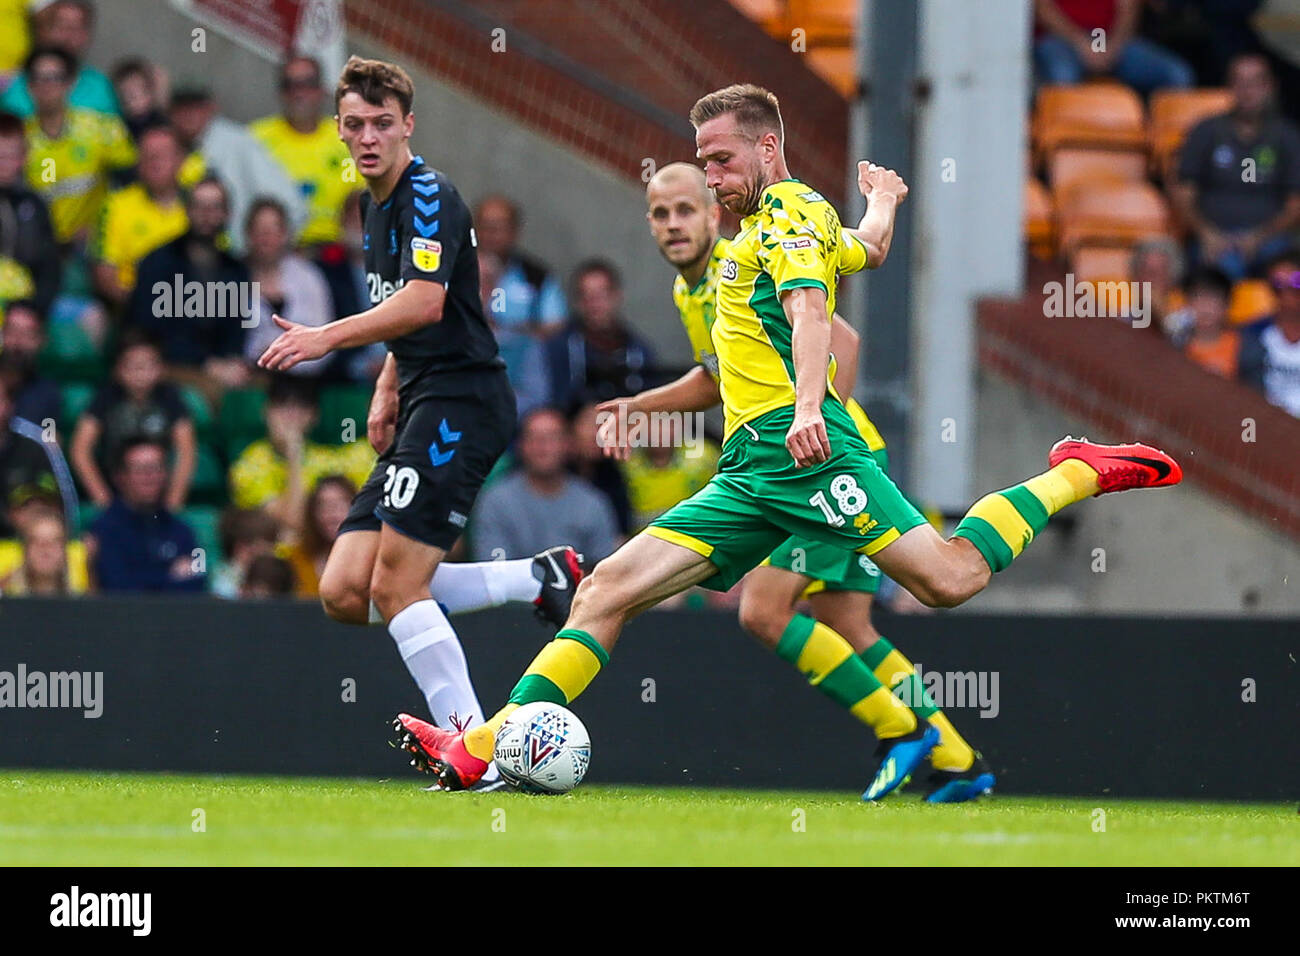 Carrow Road, Norfolk, UK. 15th Sep 2018. Sky Bet EFL Championship Norwich City v Middlesbrough ;   Marco Stiepermann of Norwich clears the ball against Middlesborough.   EDITORIAL USE ONLY No use with unauthorised audio, video, data, fixture lists, club/league logos or 'live' services. No use in betting, games or single club/league/player publications and all English Football League images are subject to DataCo Licence Credit: News Images /Alamy Live News Stock Photo